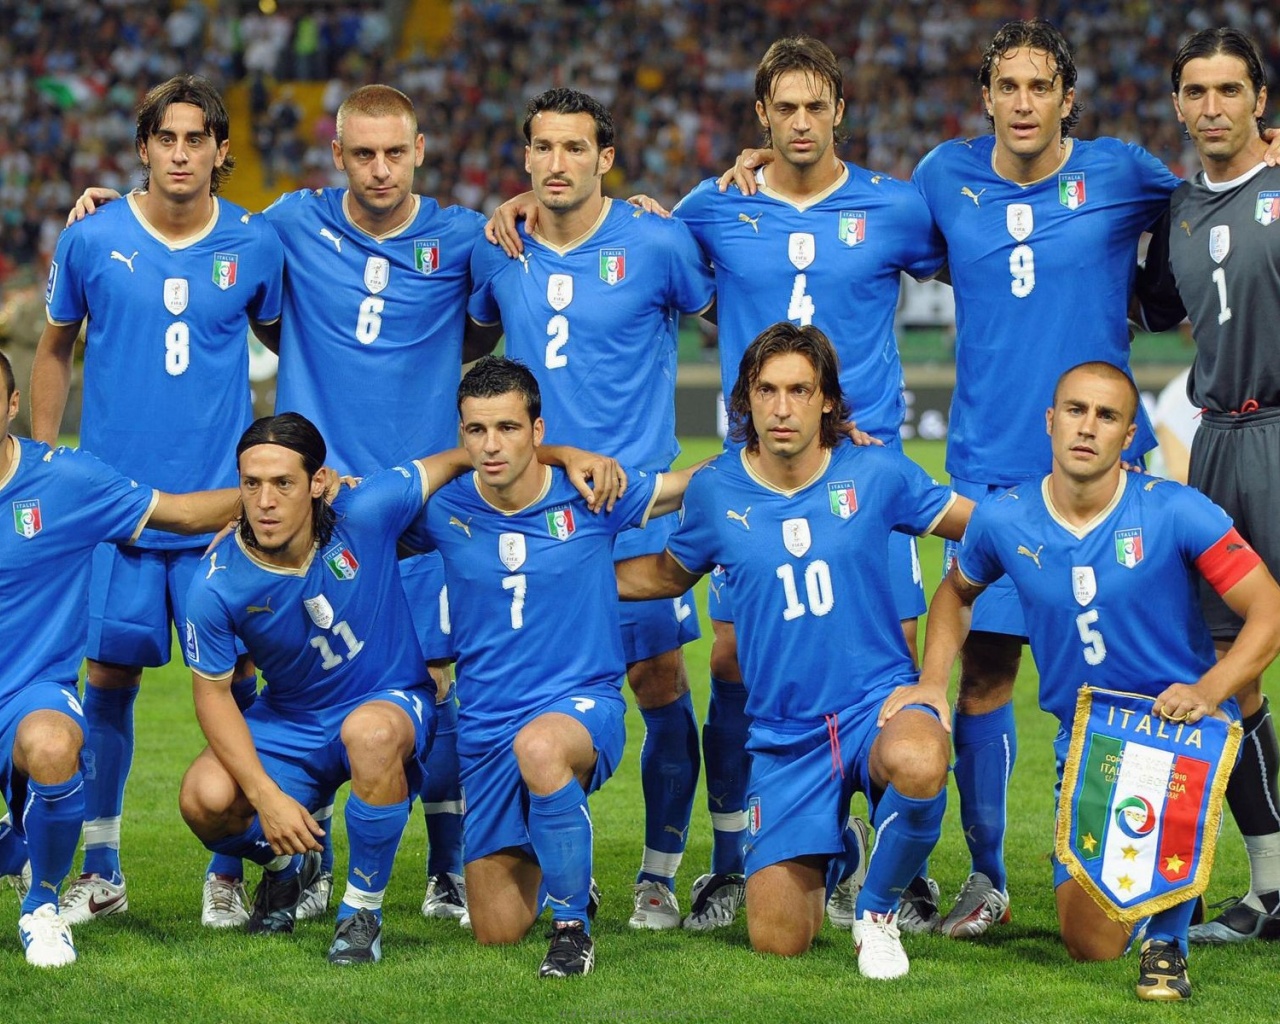 World Cup Italy National Football Team Blue Jersey